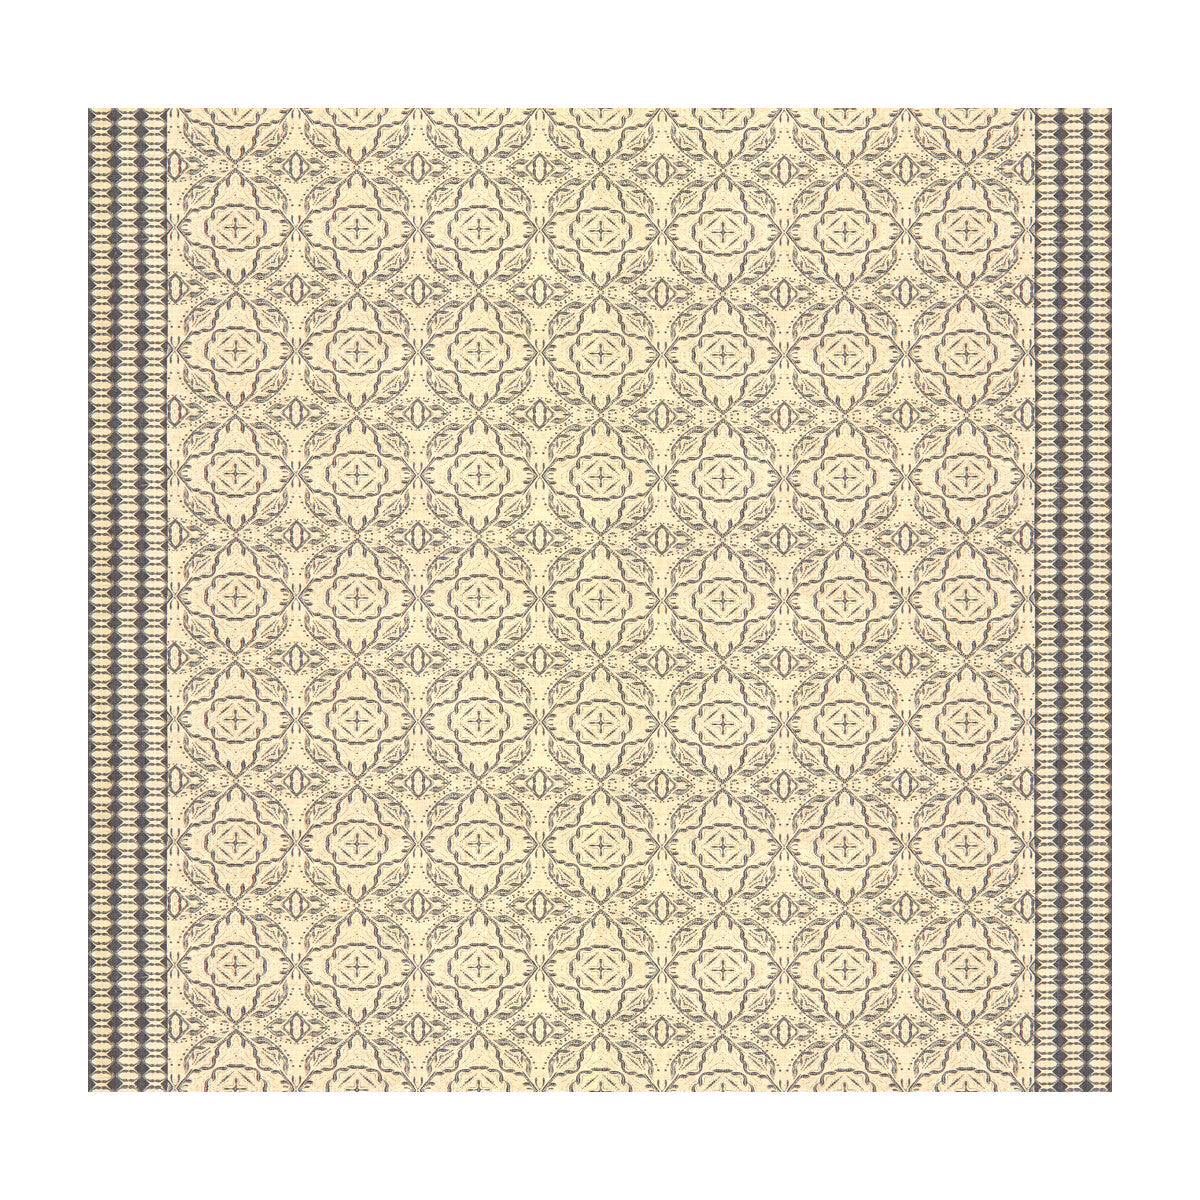 Maze fabric in metal color - pattern GWF-3506.11.0 - by Lee Jofa Modern in the Allegra Hicks Garden collection